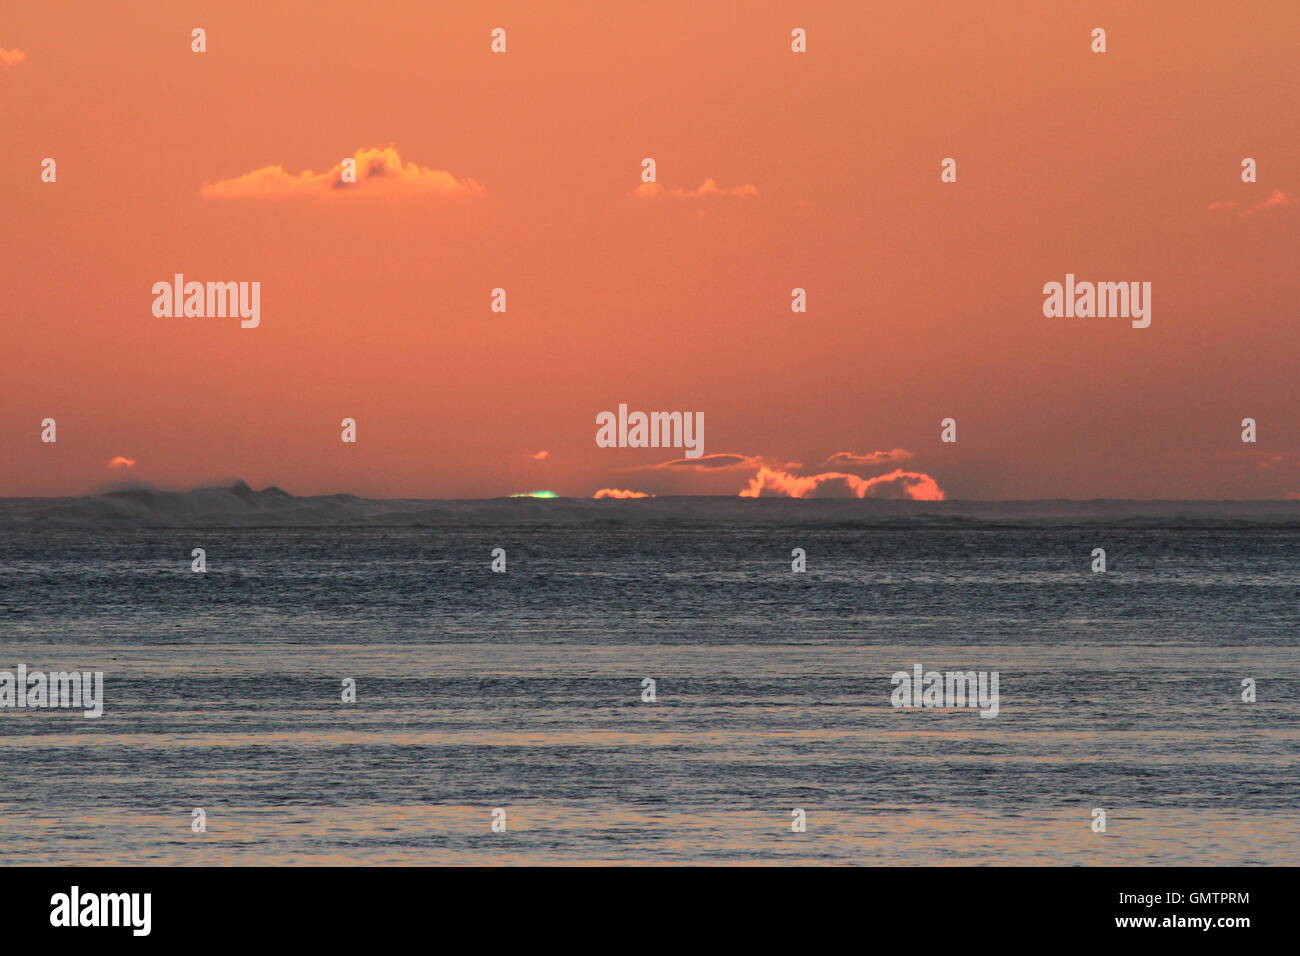 Sunset on Mauritius with a rare green flash visible beyond the waves crashing on the reef Stock Photo